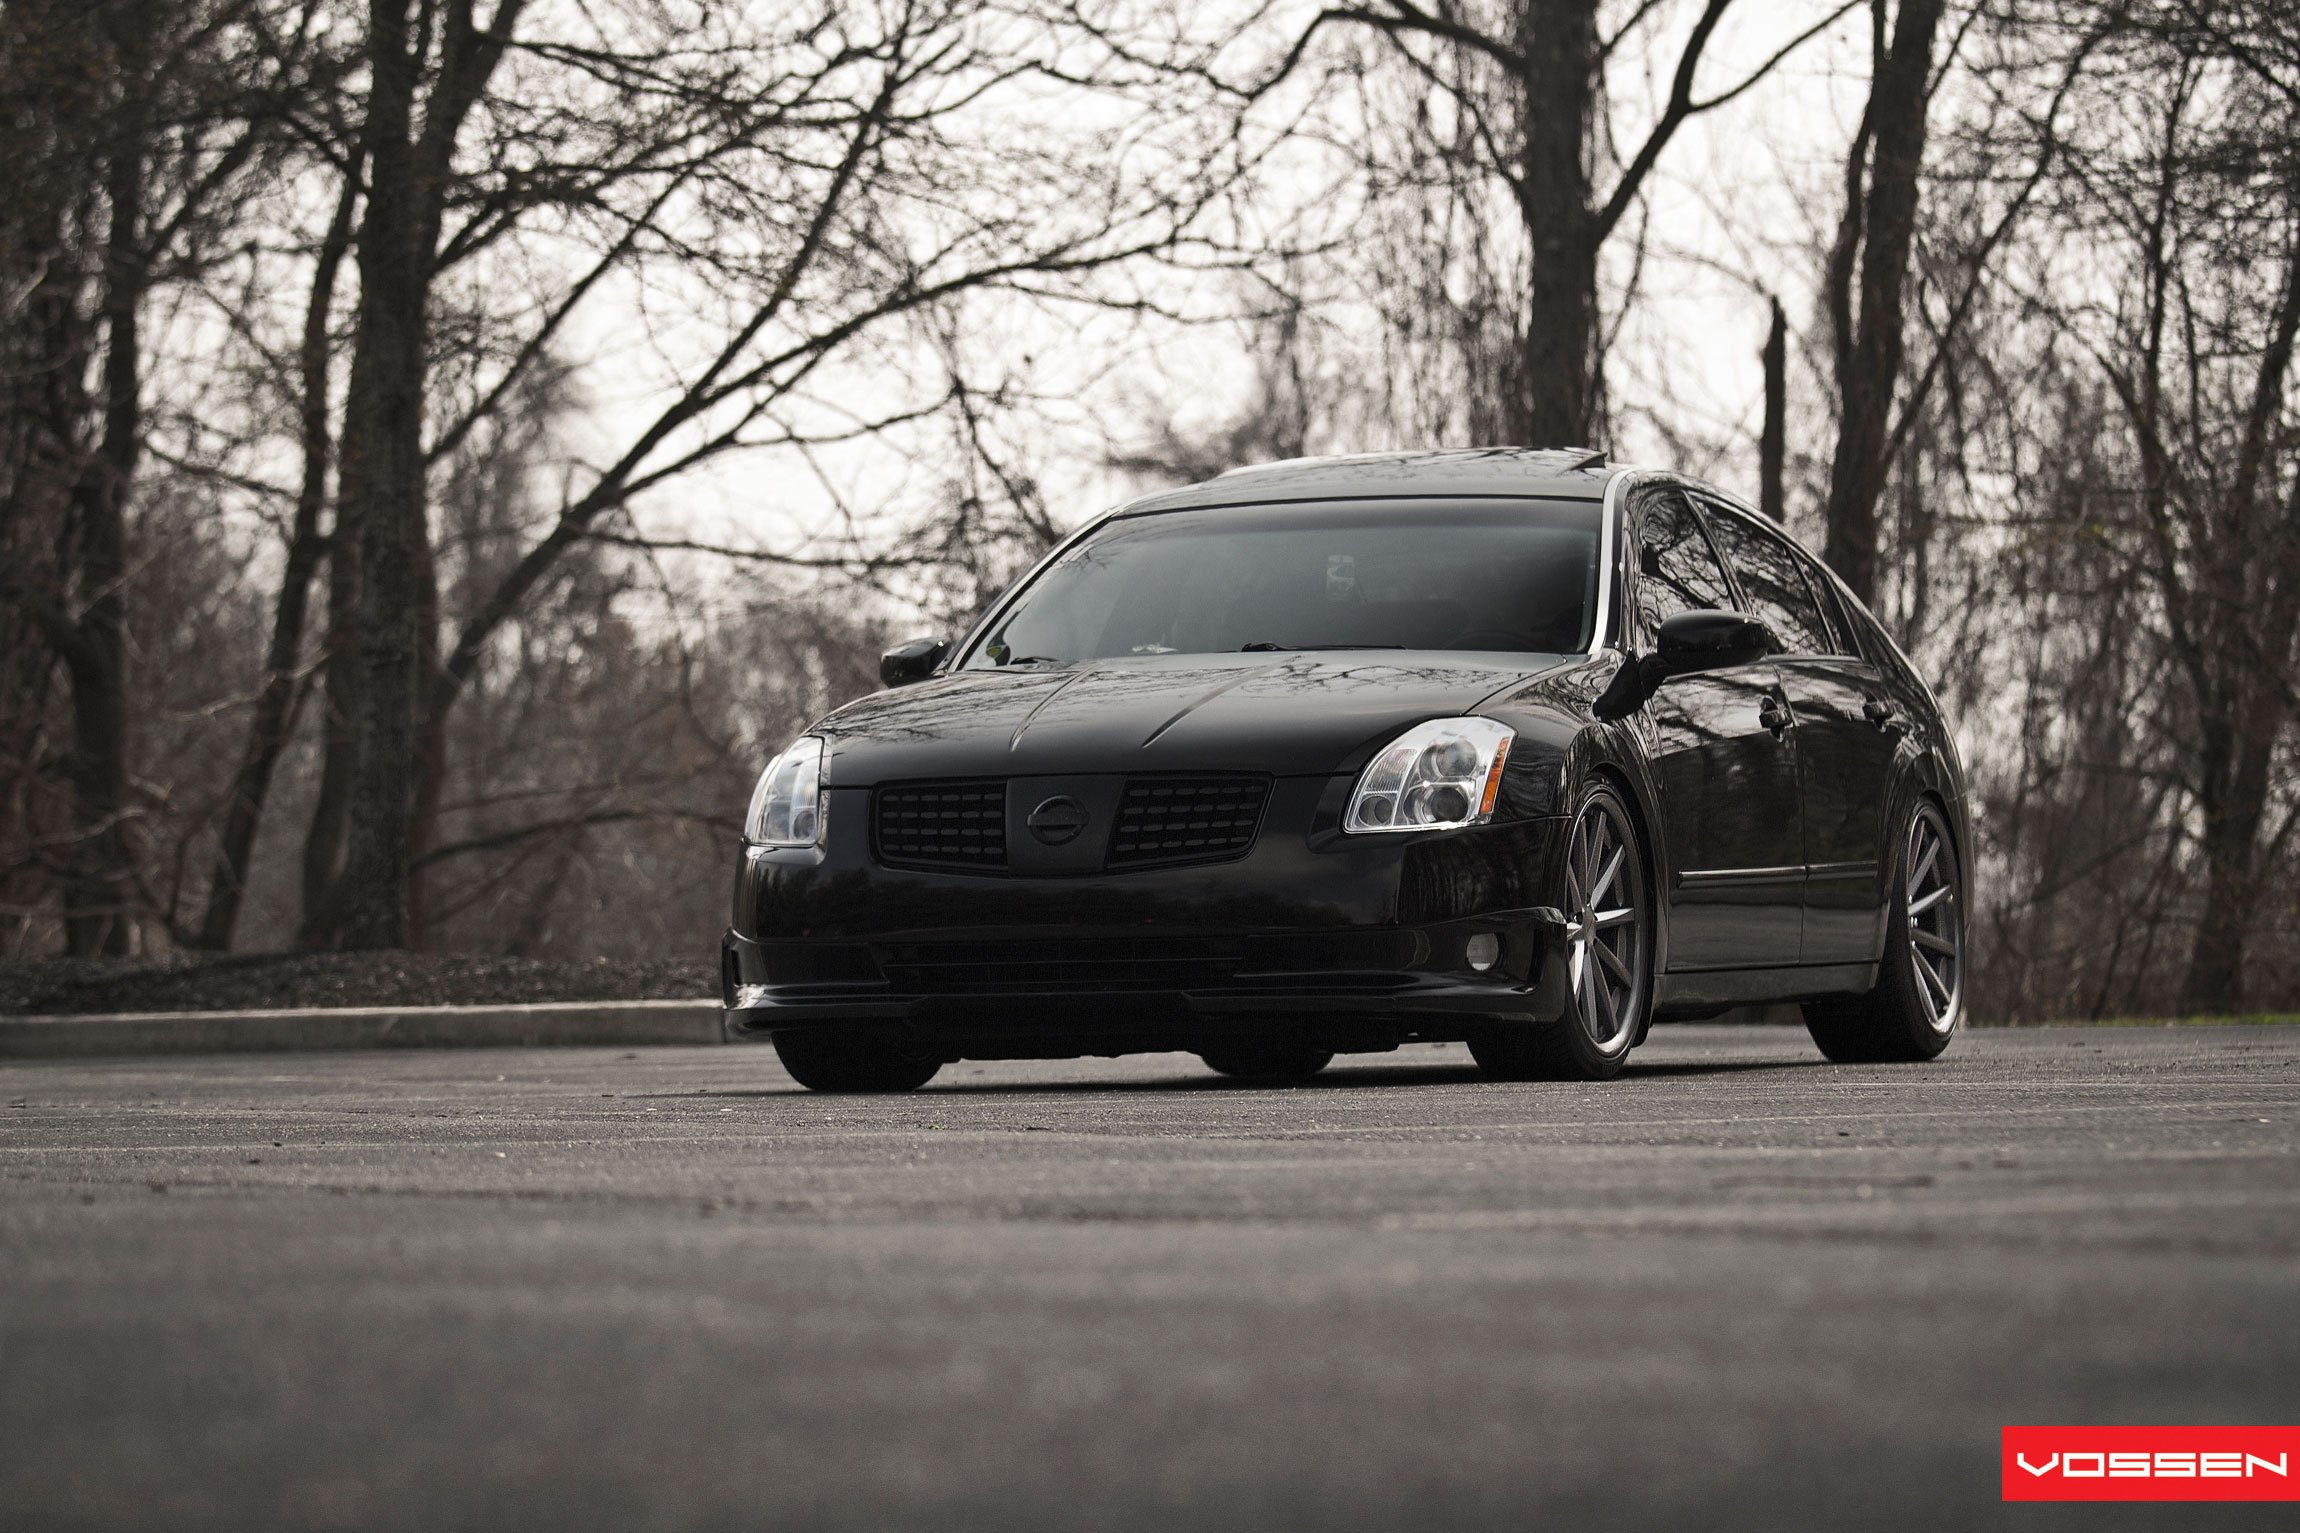 Custom Nissan Maxima with Blacked Out Grille - Photo by Vossen